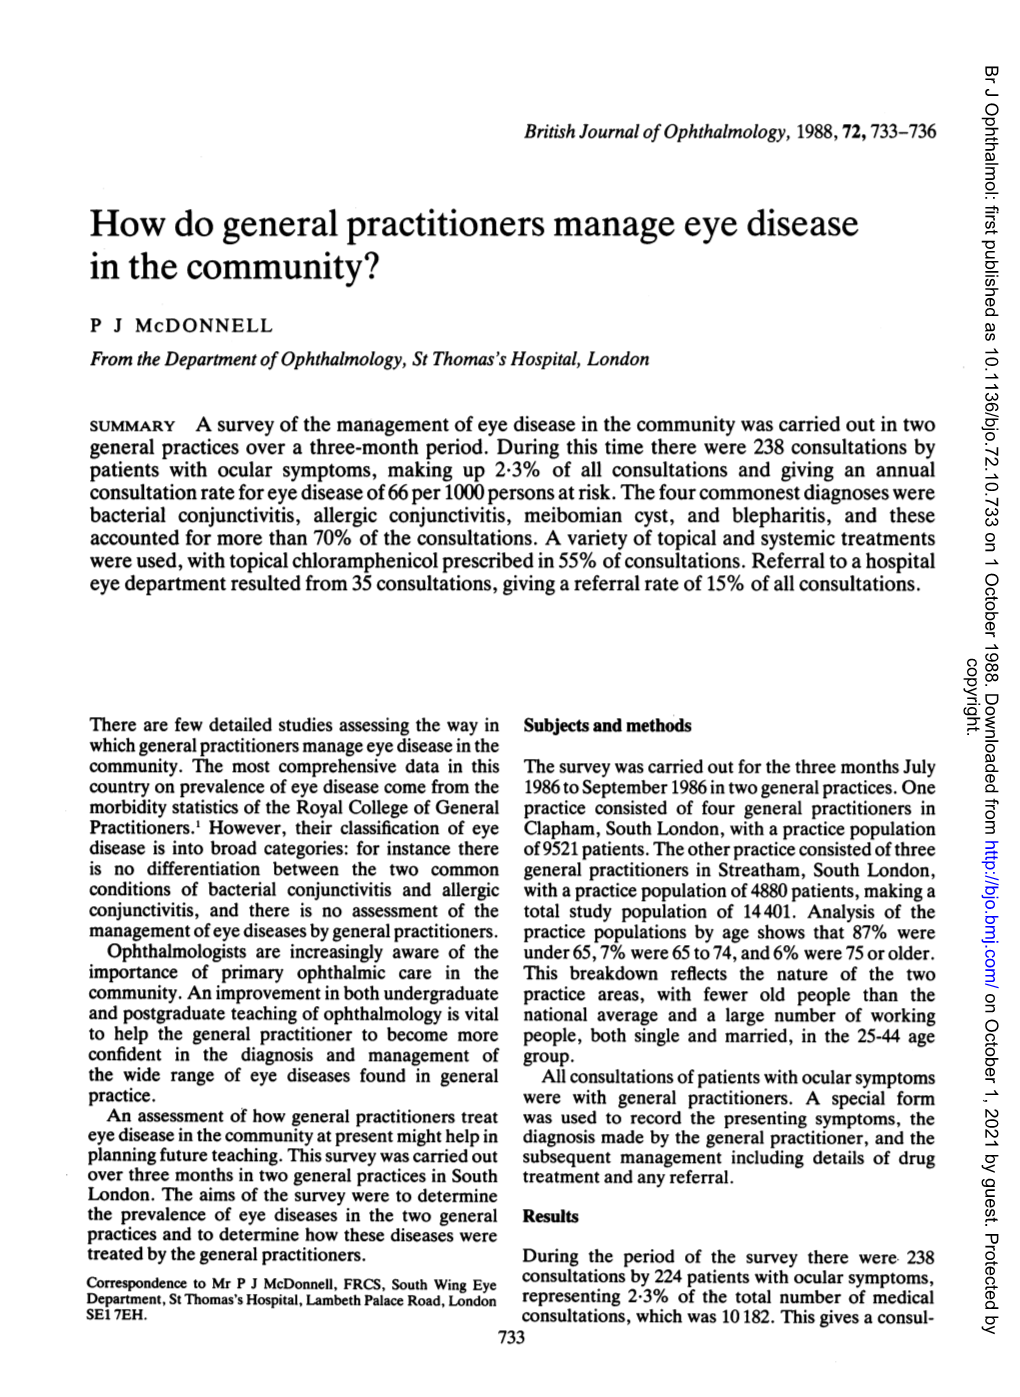 How Do General Practitioners Manage Eye Disease in the Community?